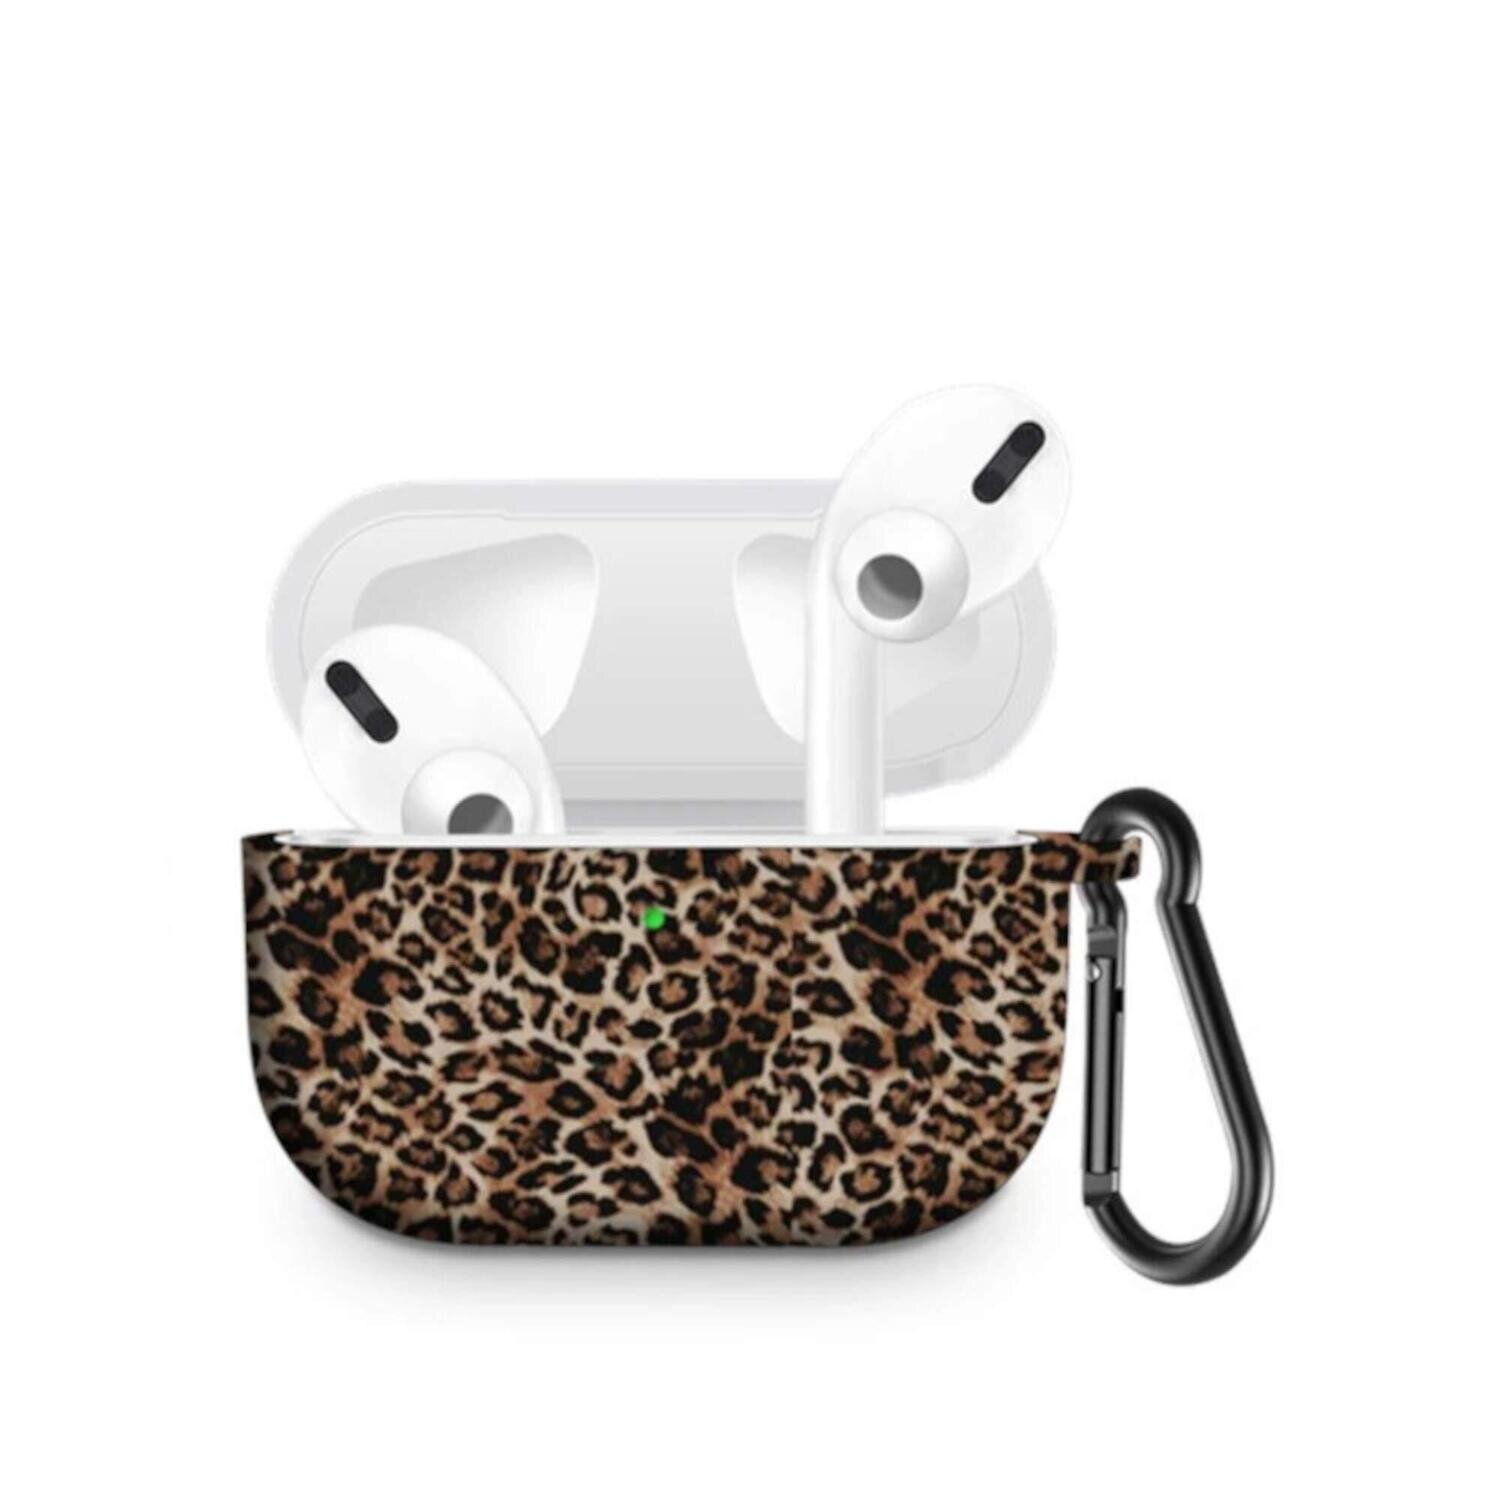 Cute Case Cover for Airpods Pro | Leopard